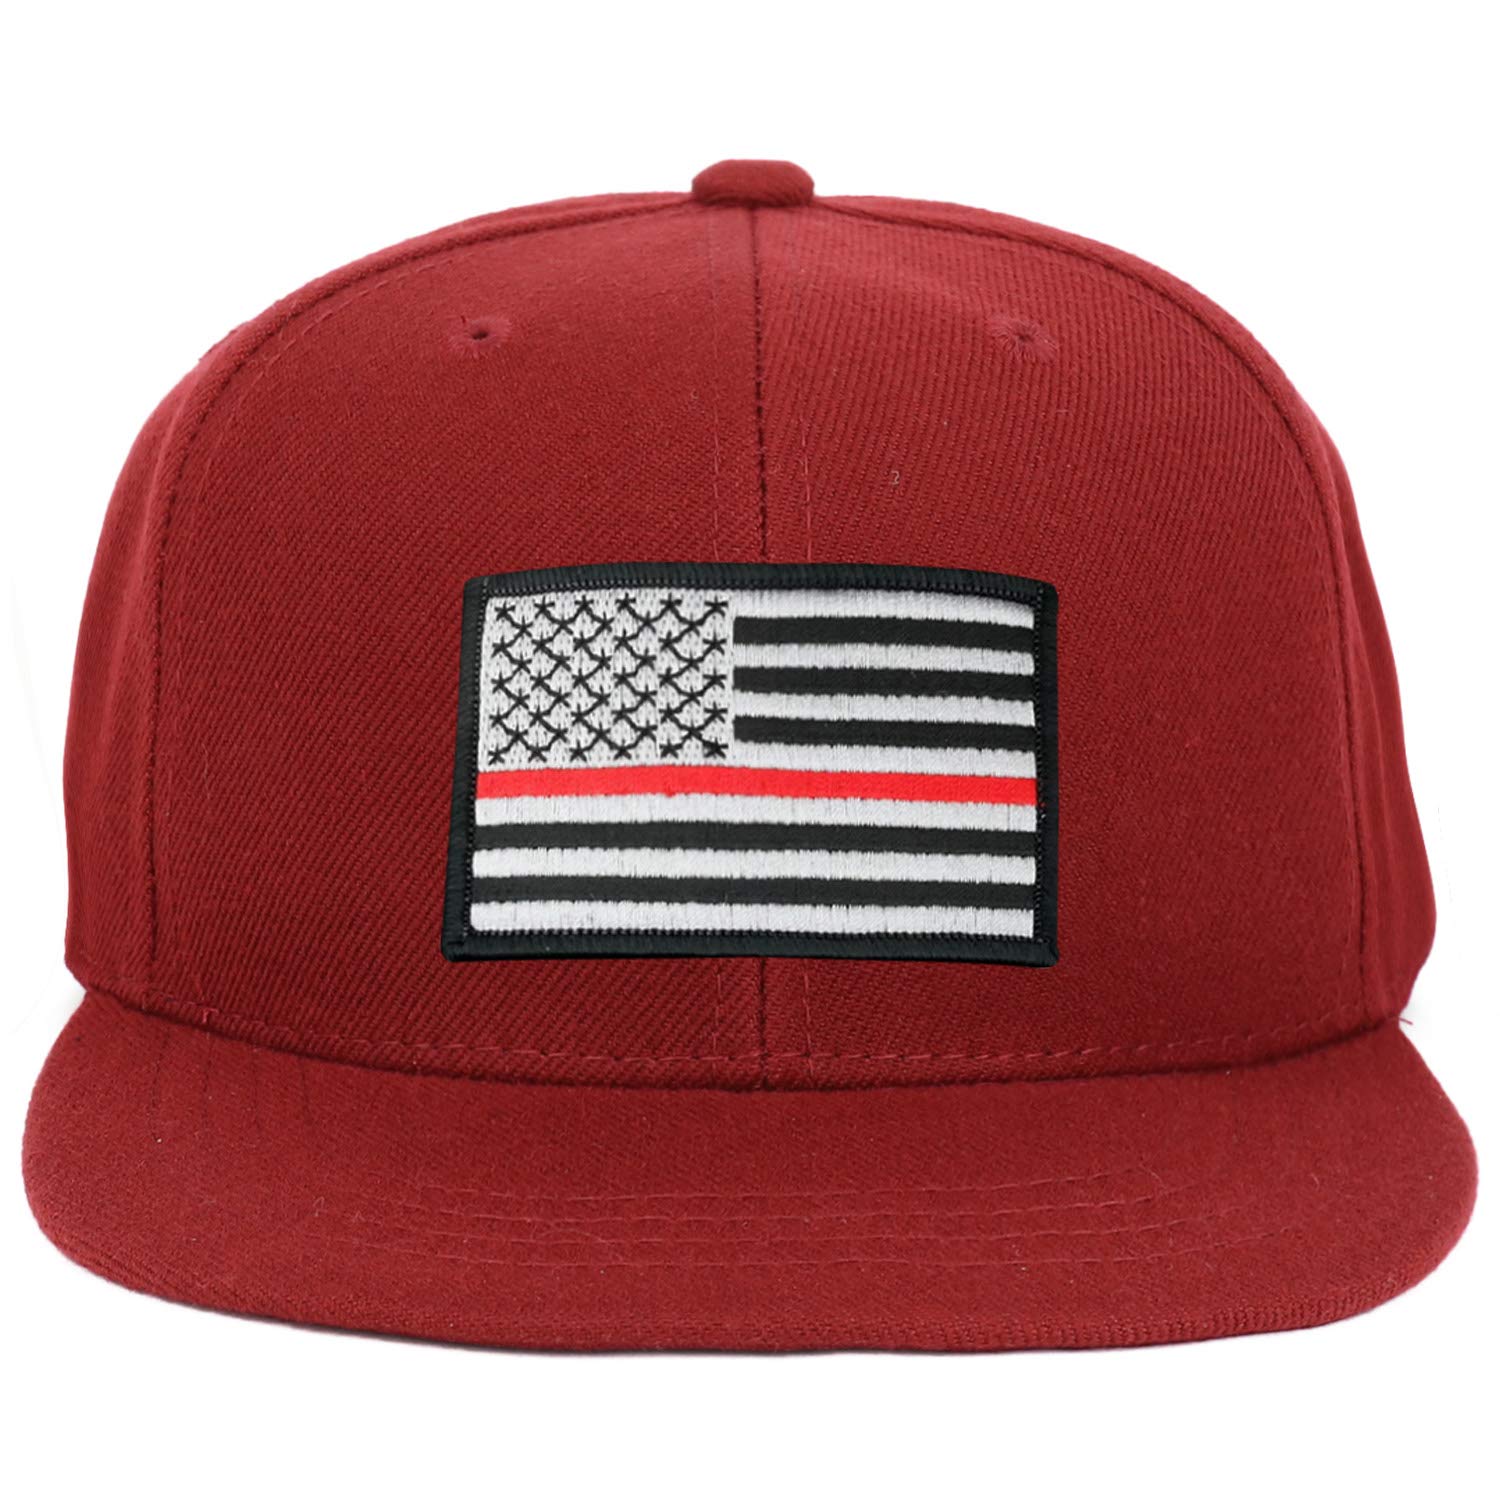 Armycrew Youth Kid Size Thin Red Line 2 American Flag Patch Flat Bill Snapback Baseball Cap